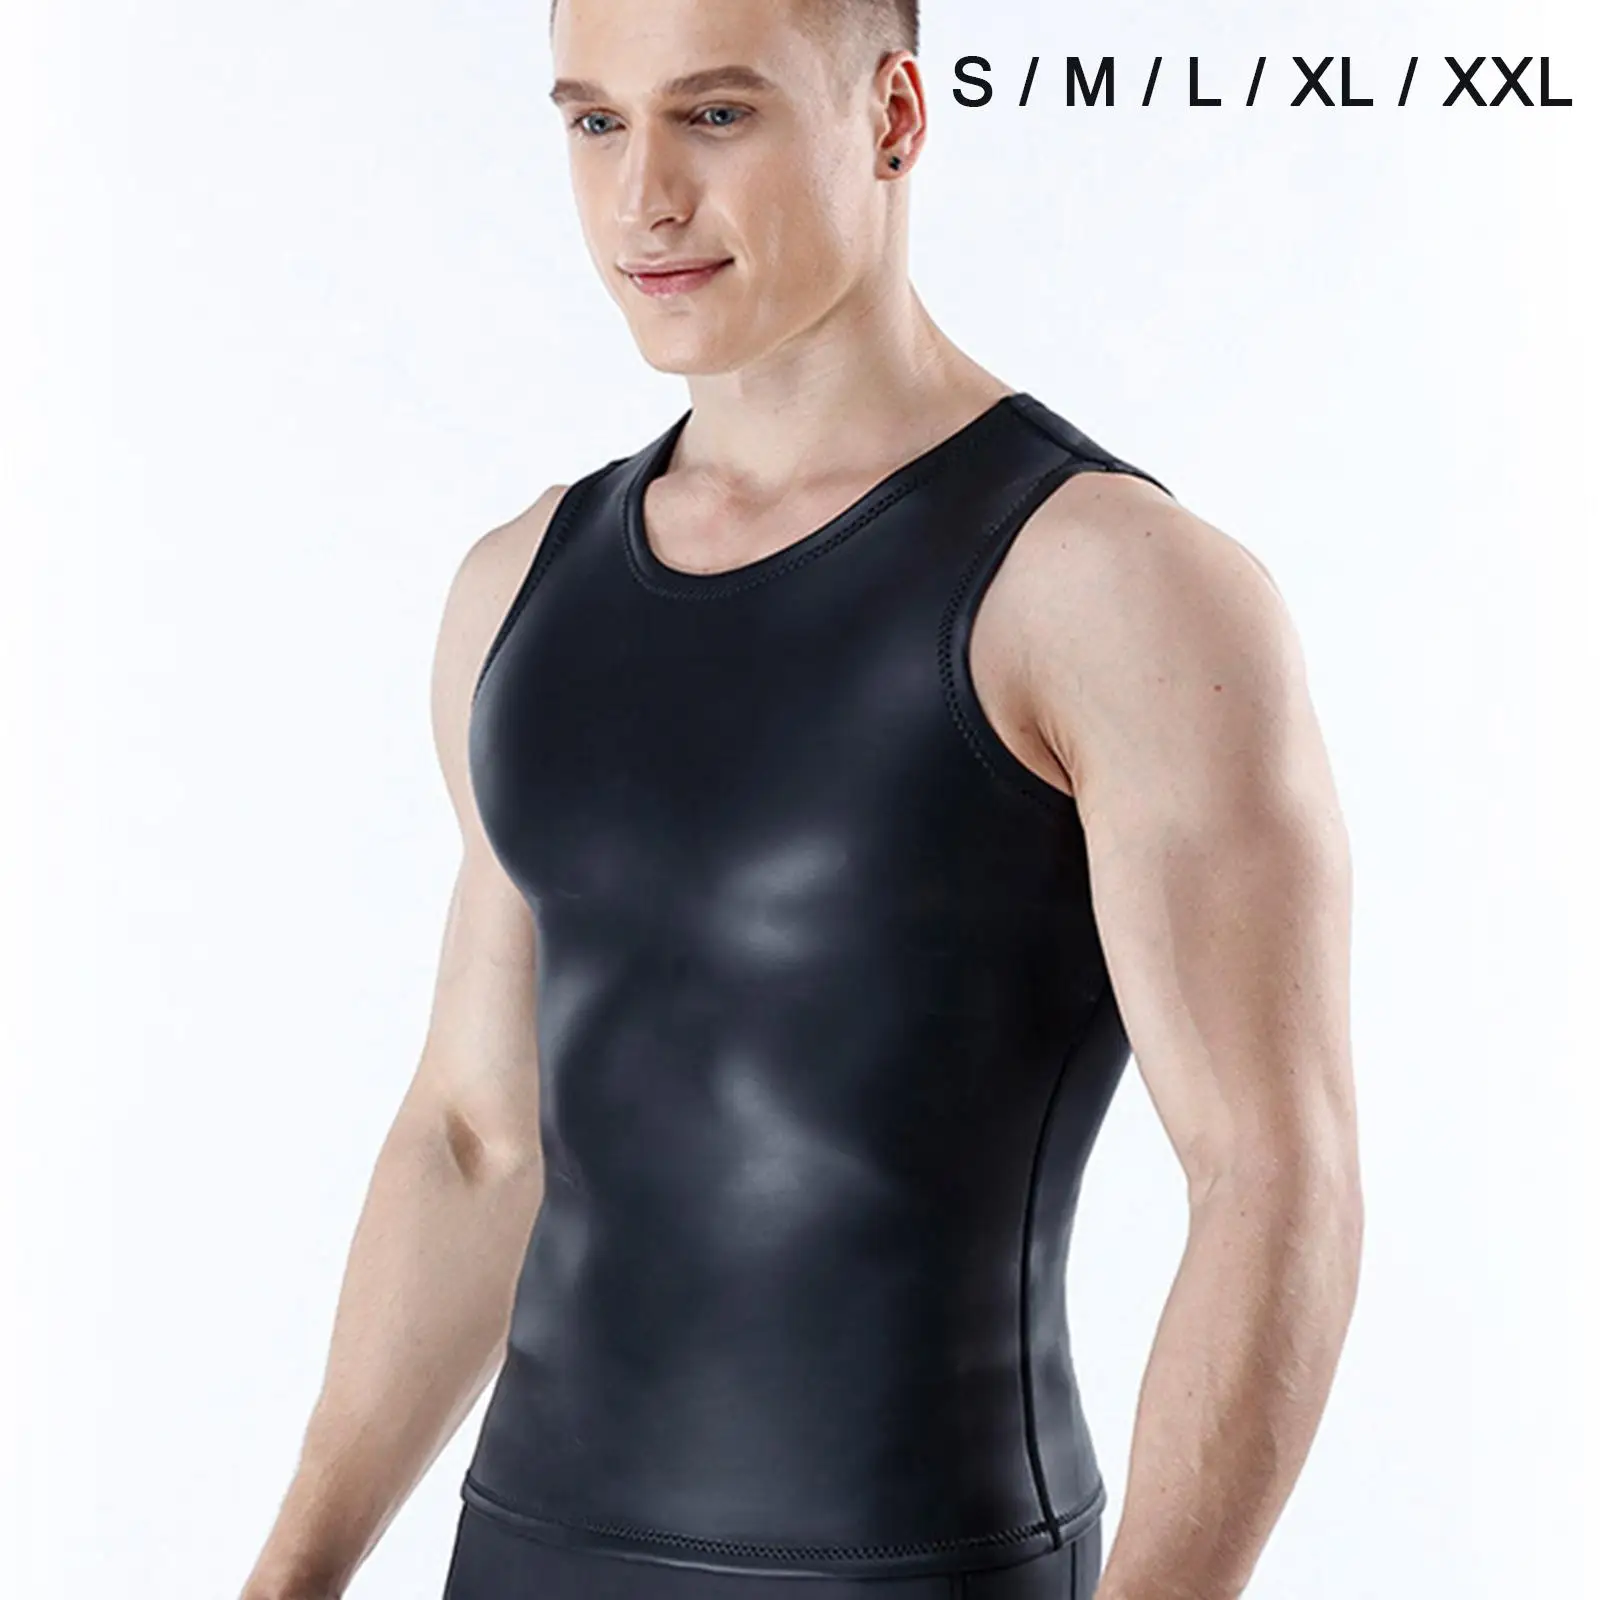 Wetsuits Vest Round Neck Super Elastic Quick Drying Men Diving Suit Tops for Running Spearfishing Water Sports Swimming Canoeing